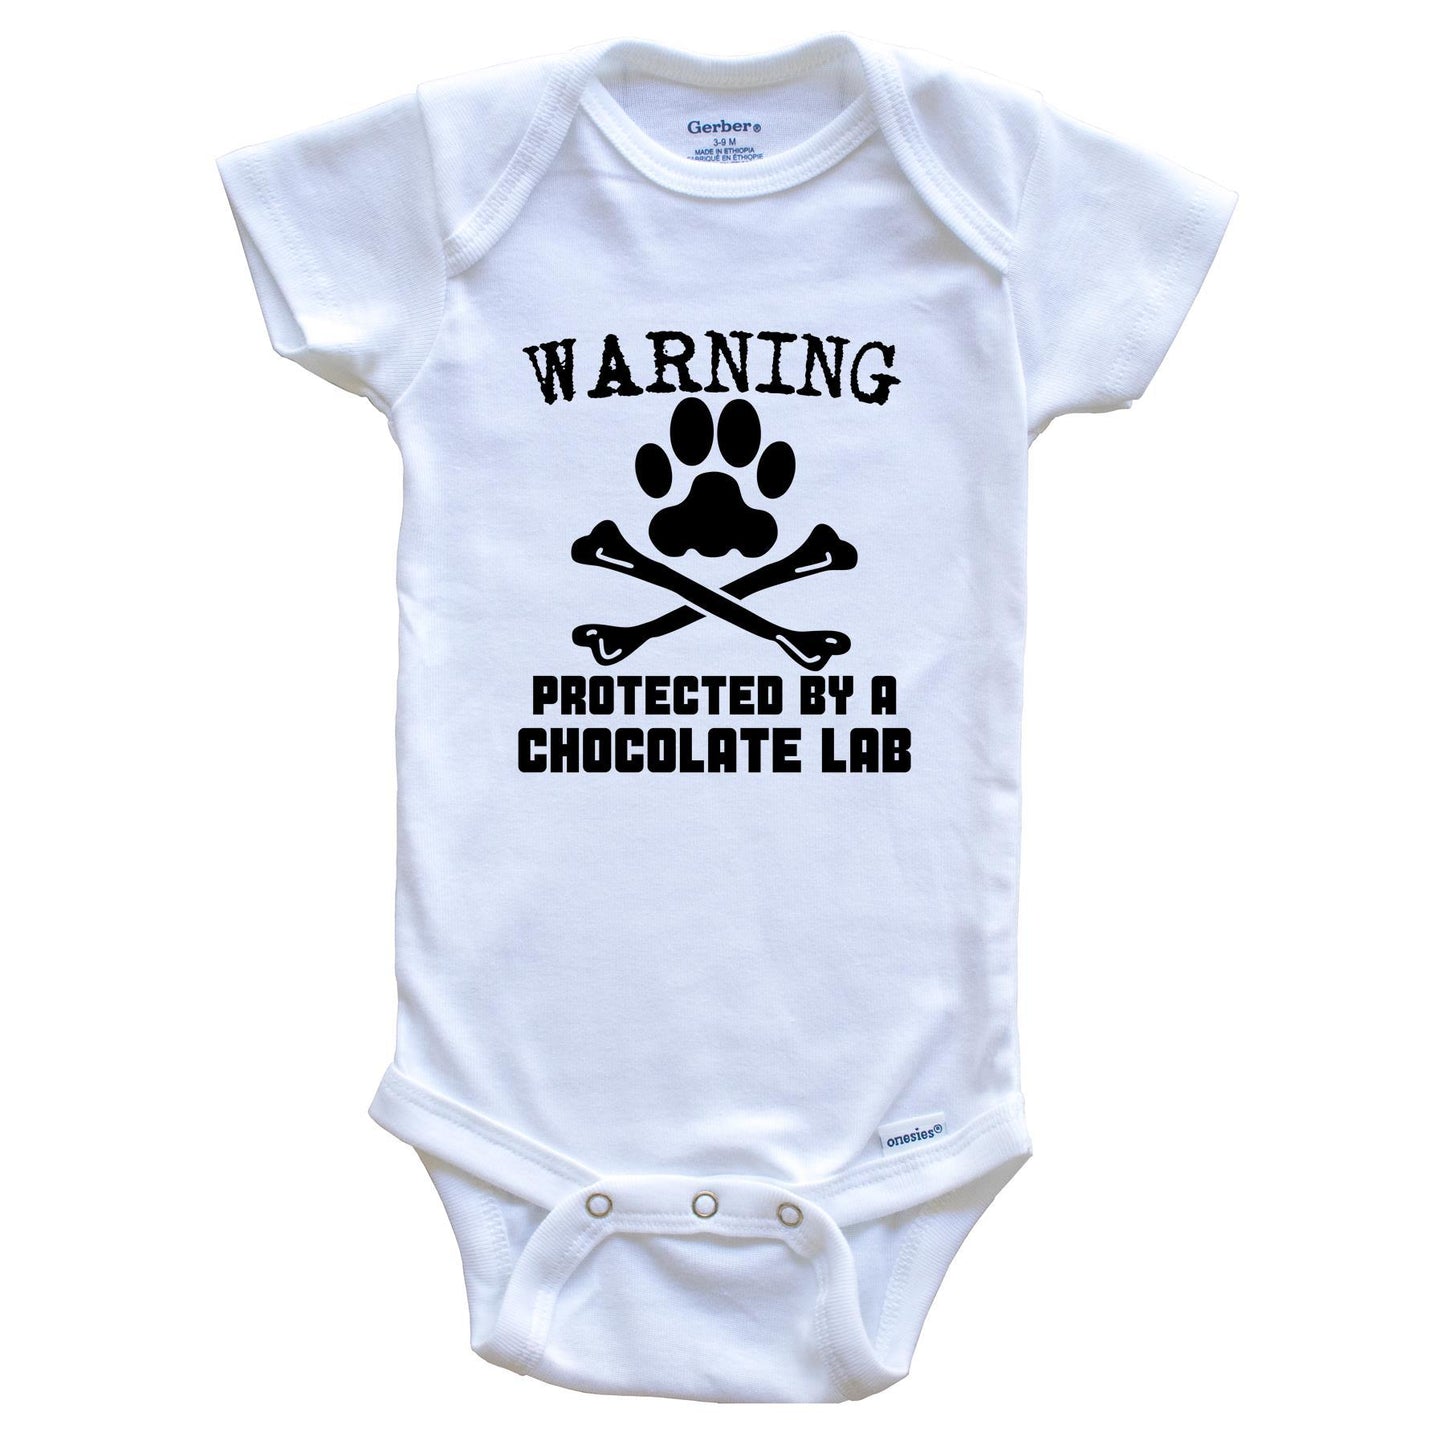 Warning Protected By A Chocolate Lab Funny Baby Onesie